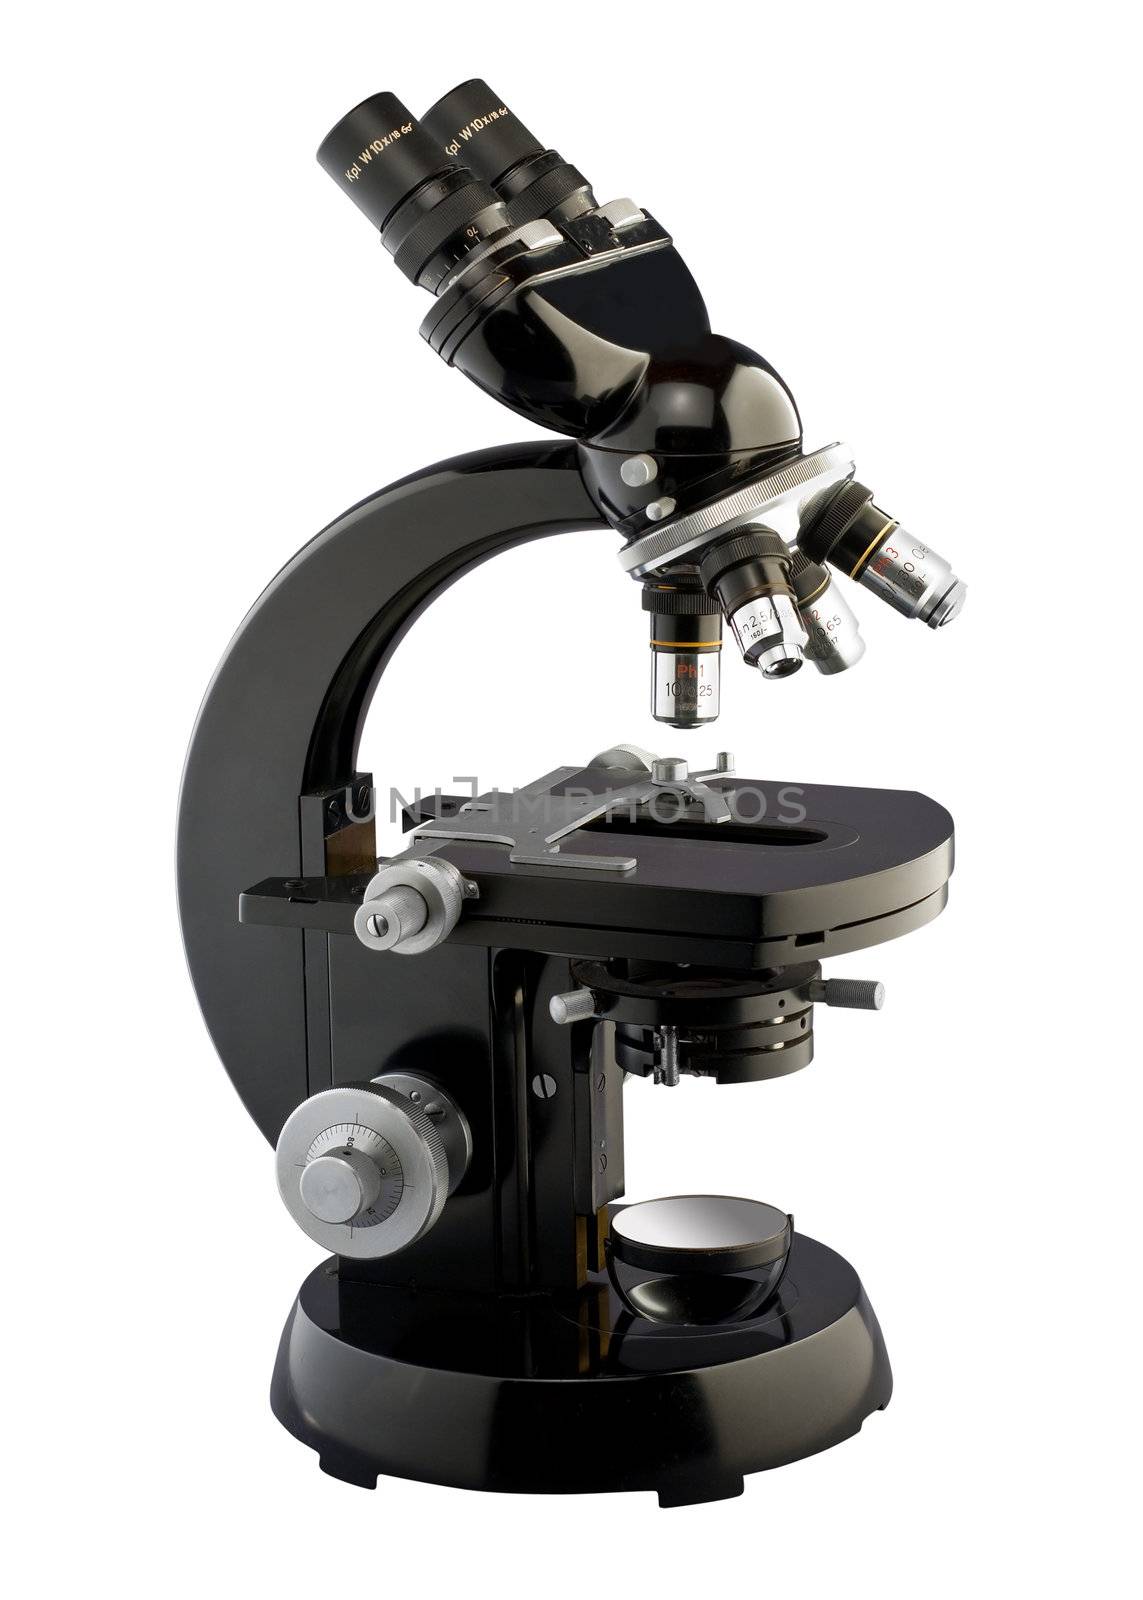 Quality Zeiss German microscope with binocular viewing, isolated